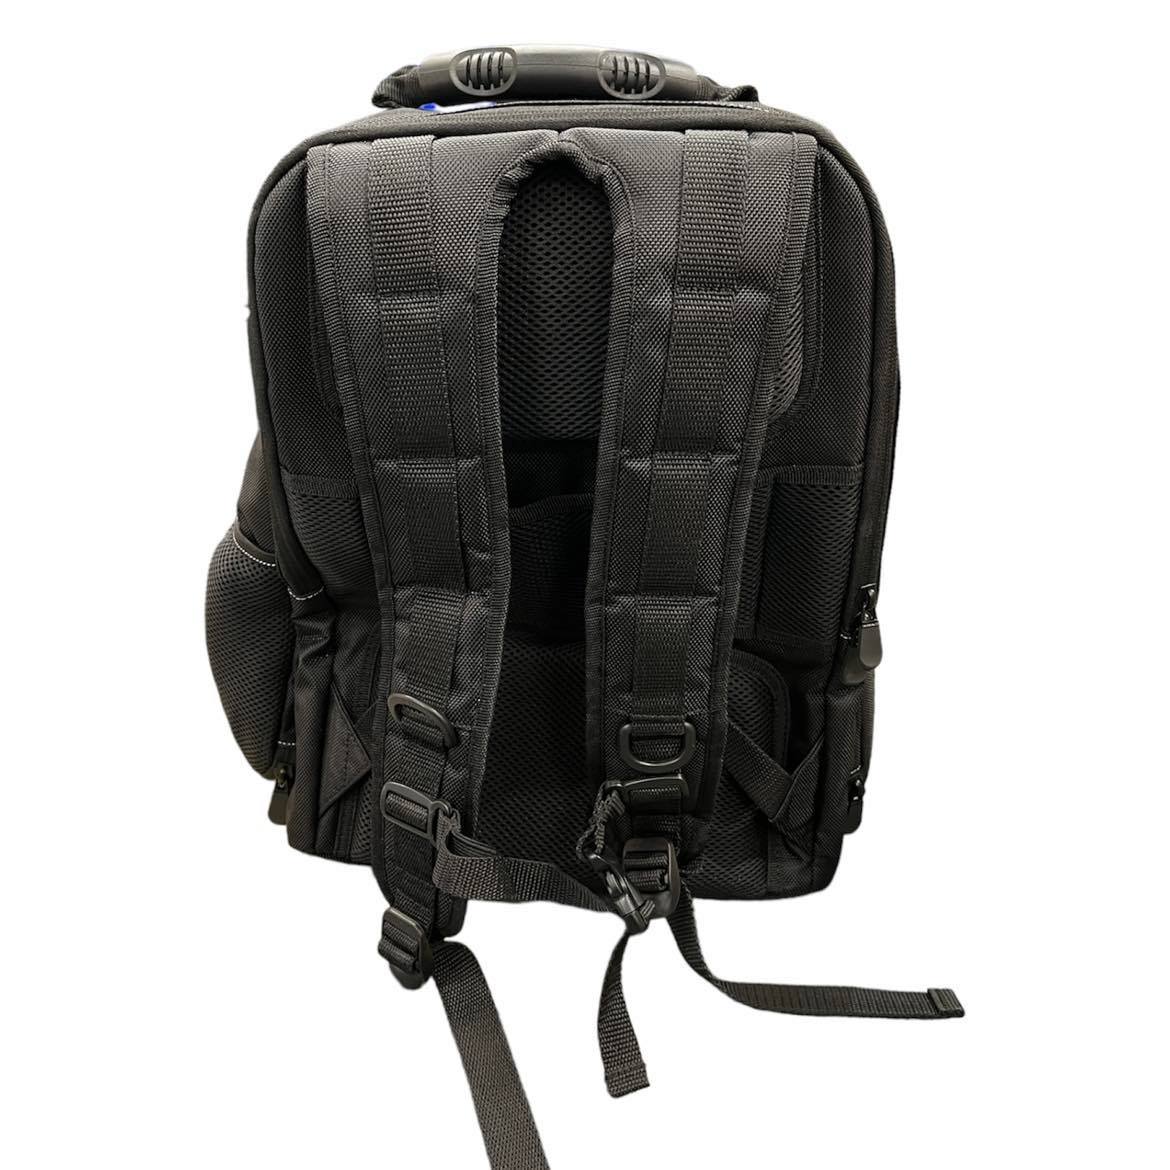 Heavy Duty Backpack with Tool Storage by Oltre